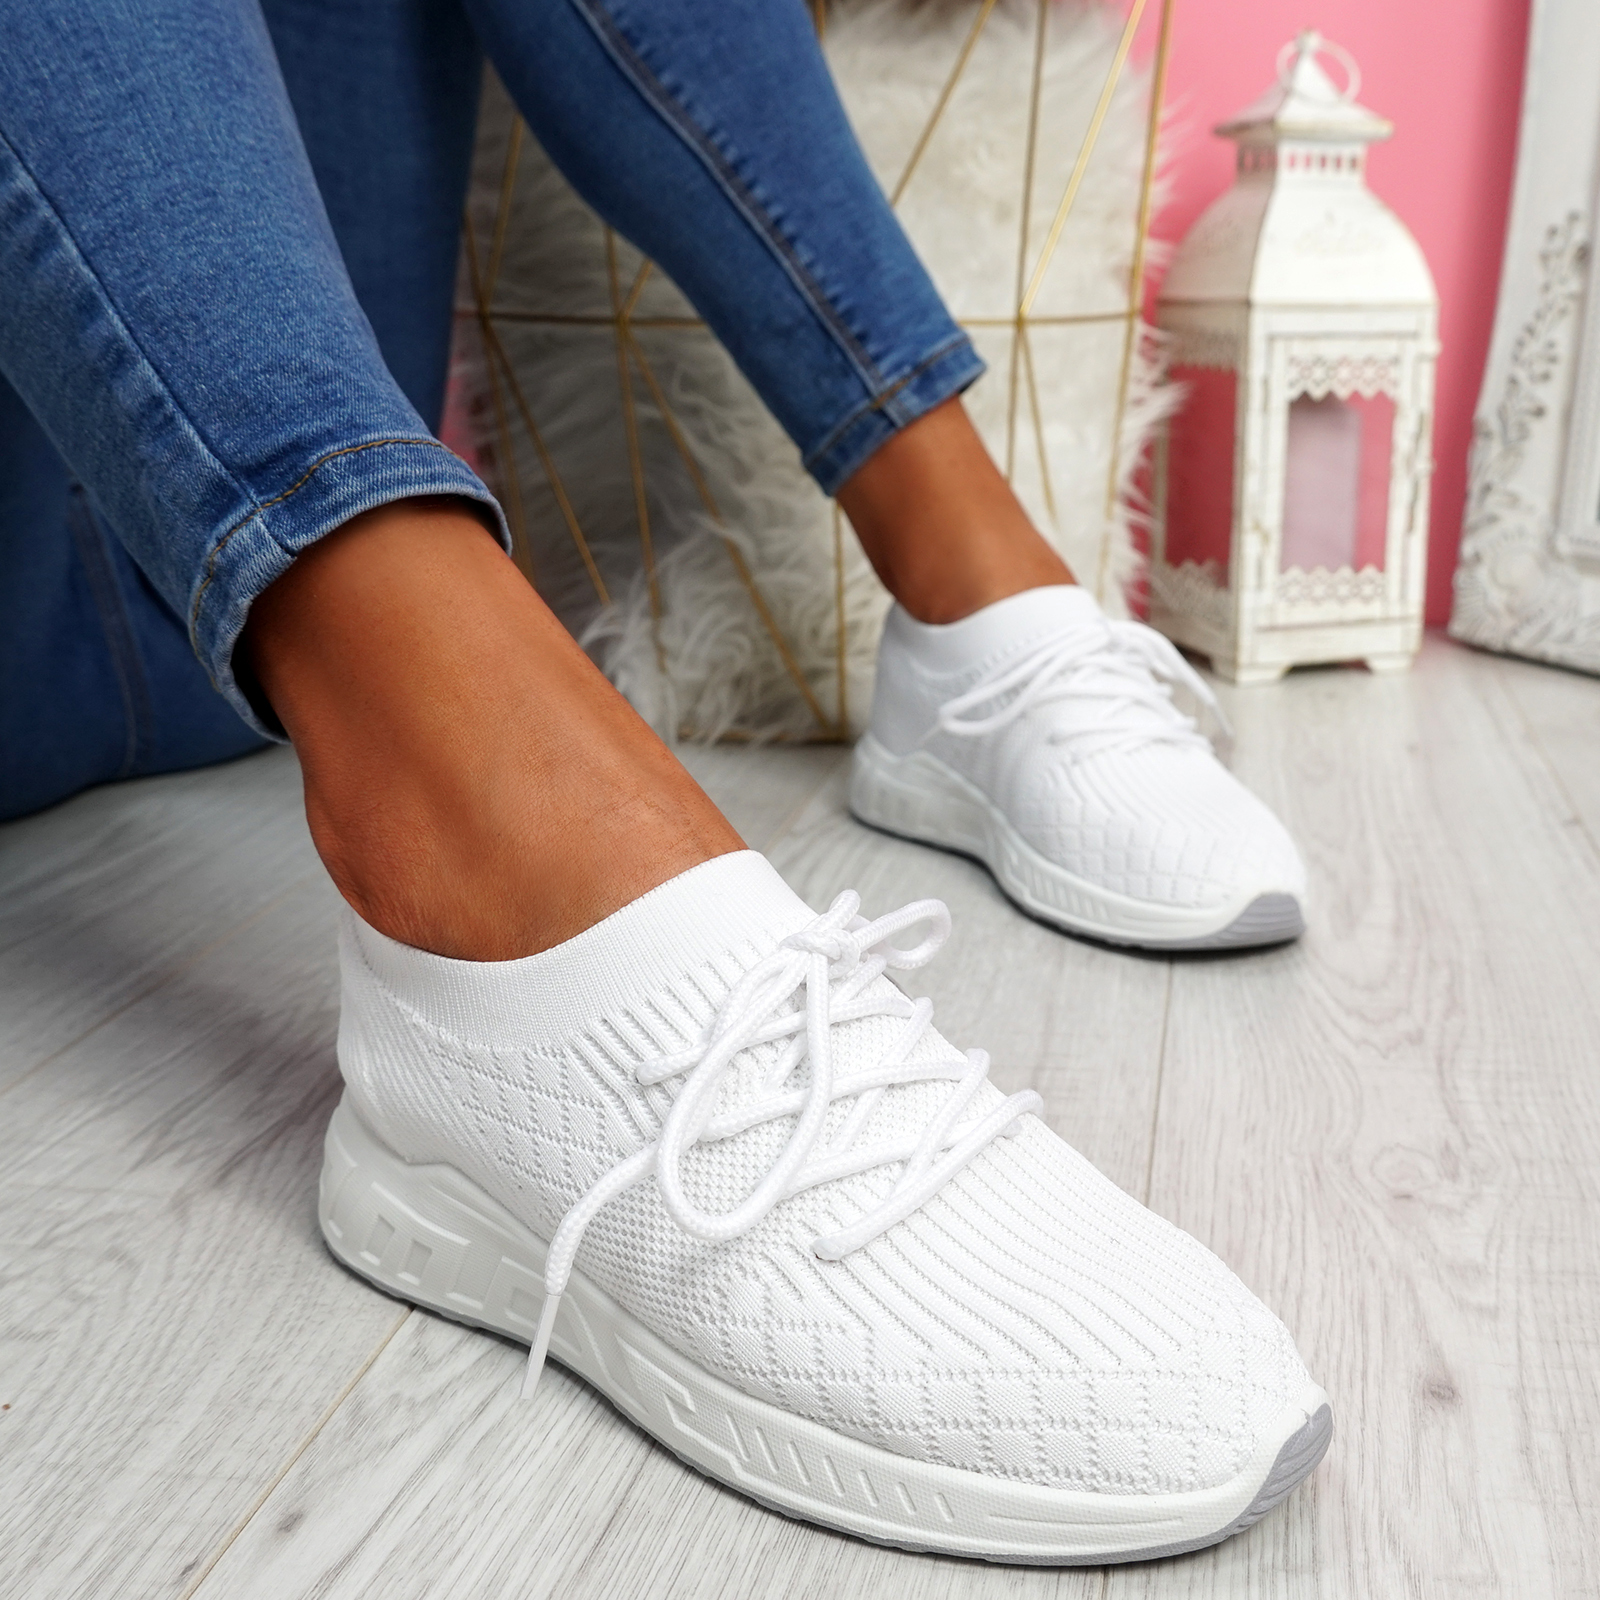 WOMENS LADIES KNIT TRAINERS SLIP ON LACE UP SNAKERS PARTY WOMEN SHOES ...